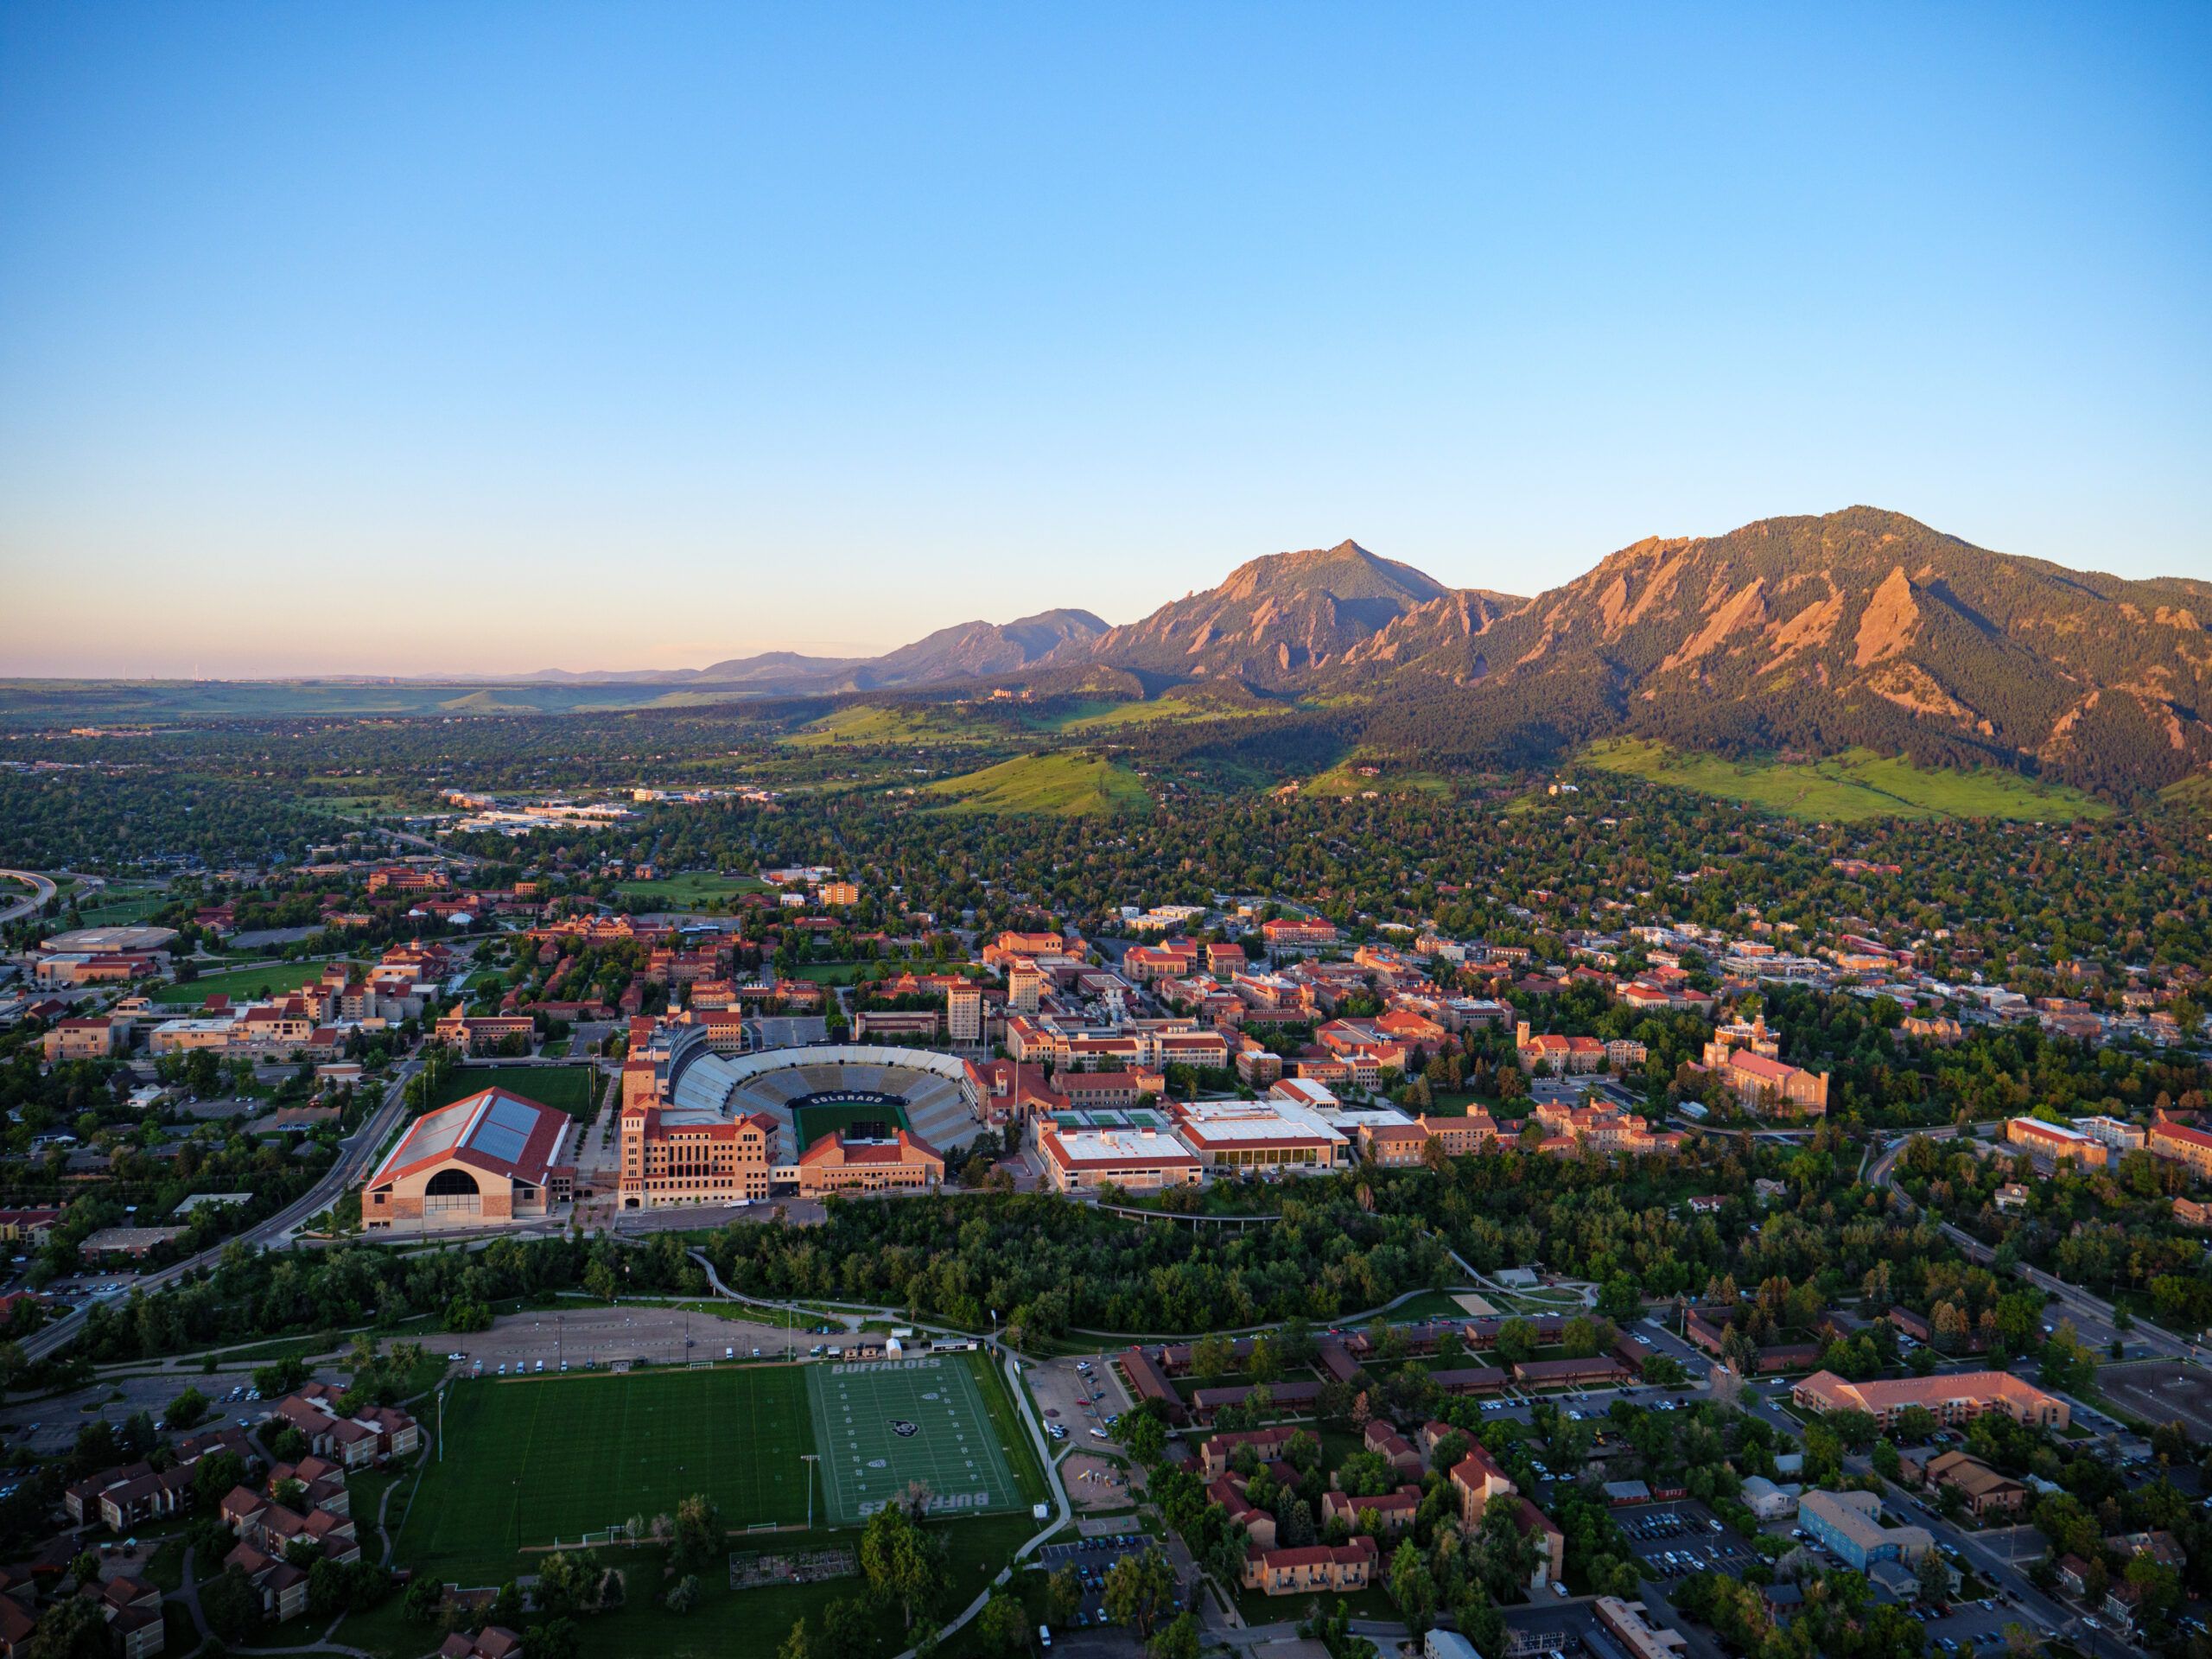 Patty Limerick claims University of Colorado restricting access to scholarly work